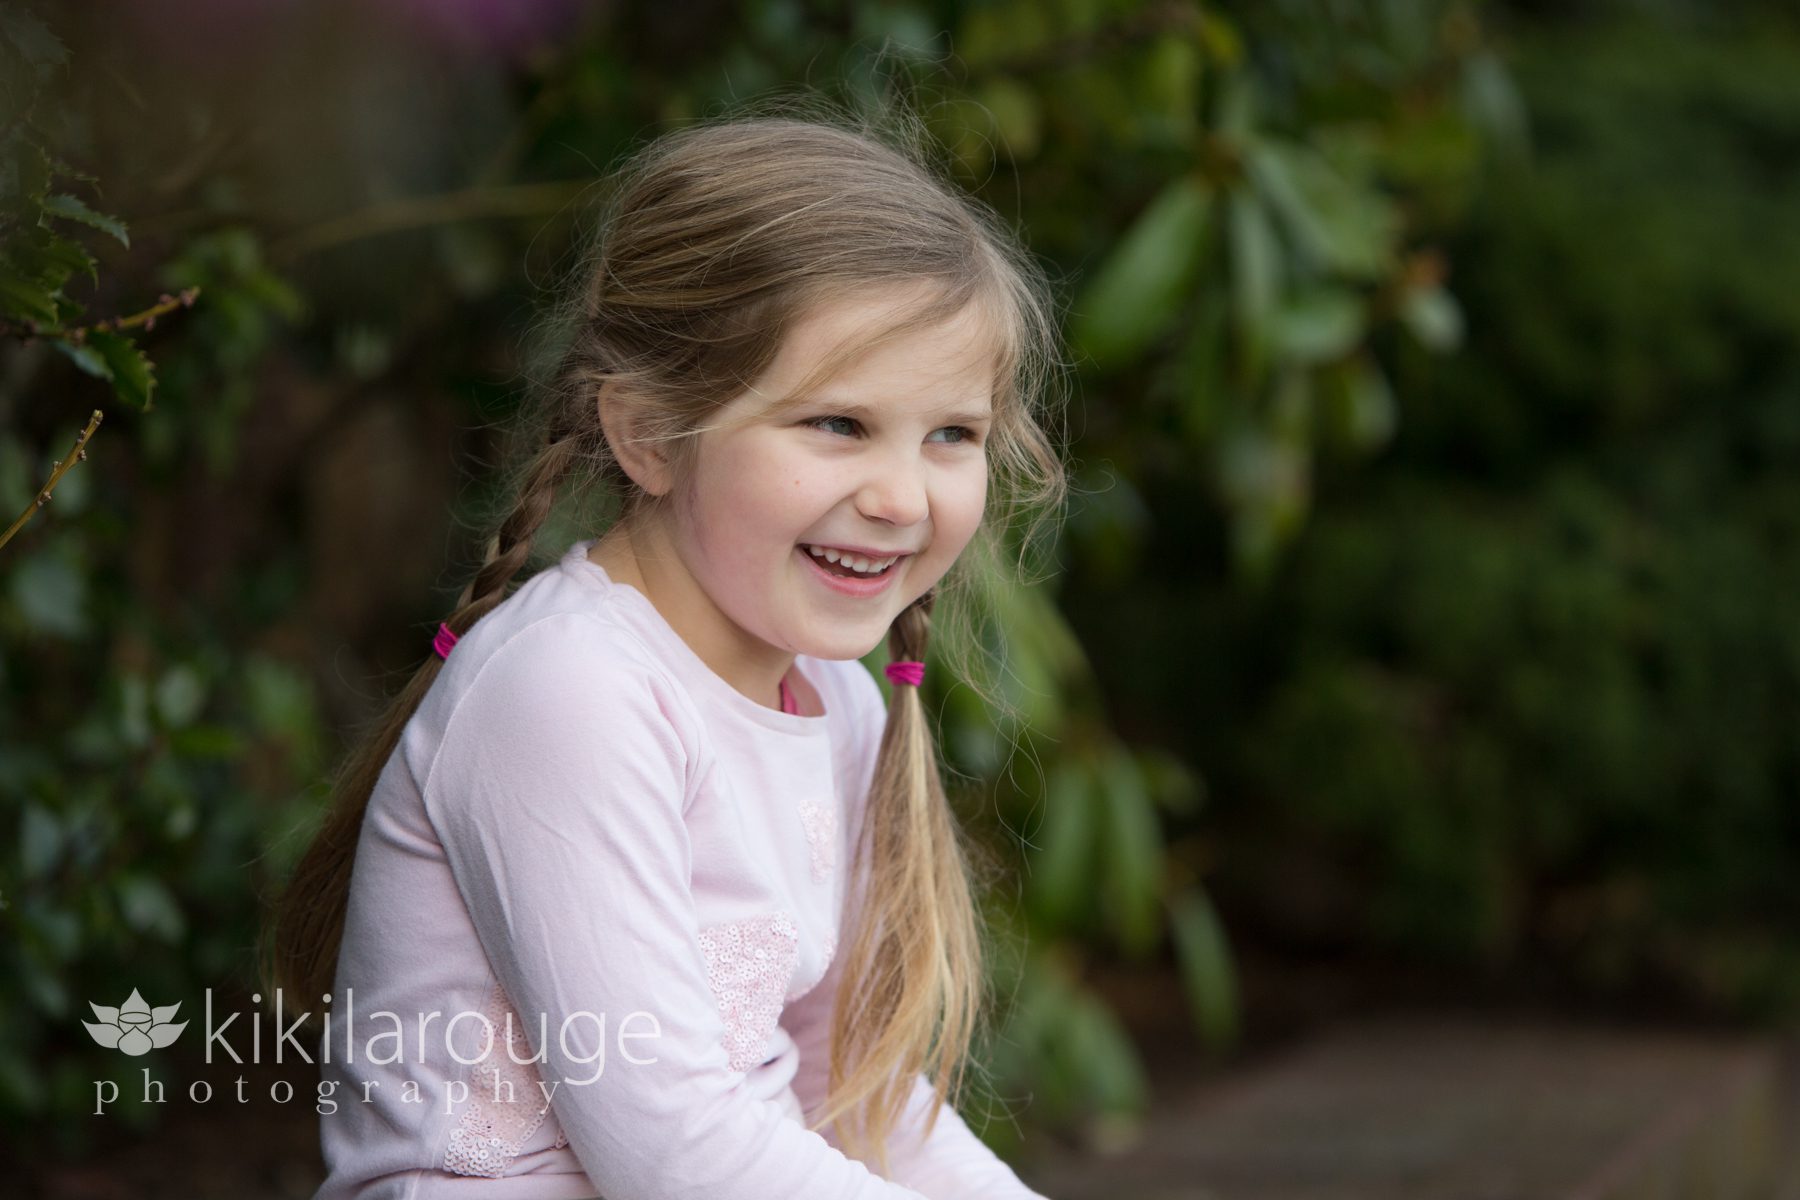 Little girl pigtails laughing in garden